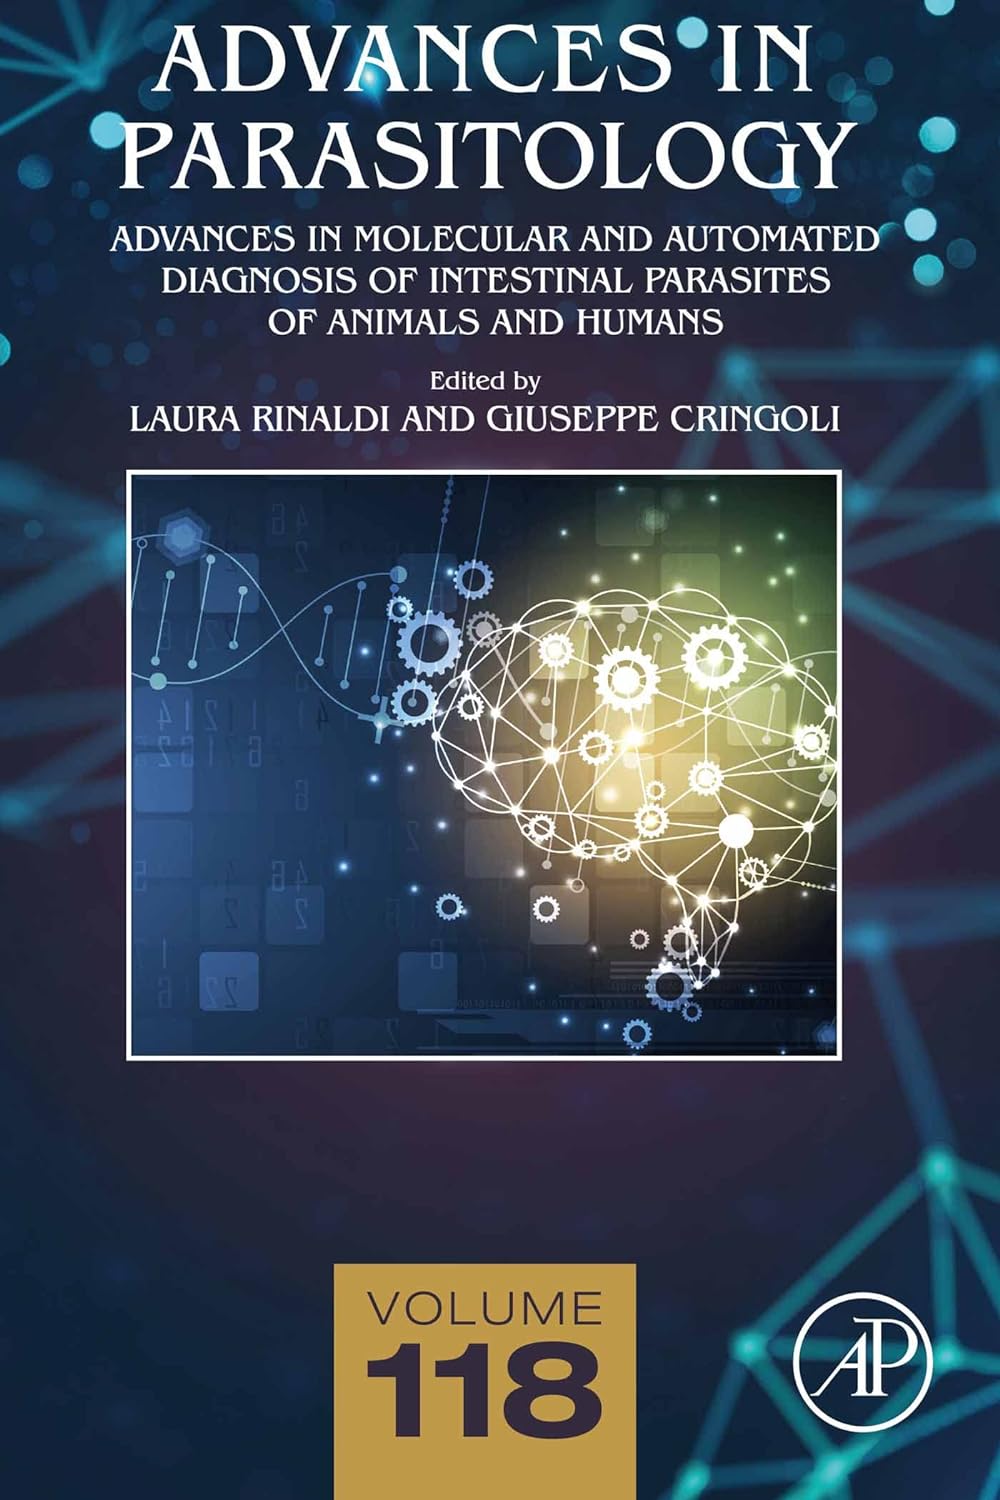 Advances in Automated Diagnosis of Intestinal Parasites of Animals and Humans (Volume 118) (Advances in Parasitology, Volume 118) by David Rollinson 